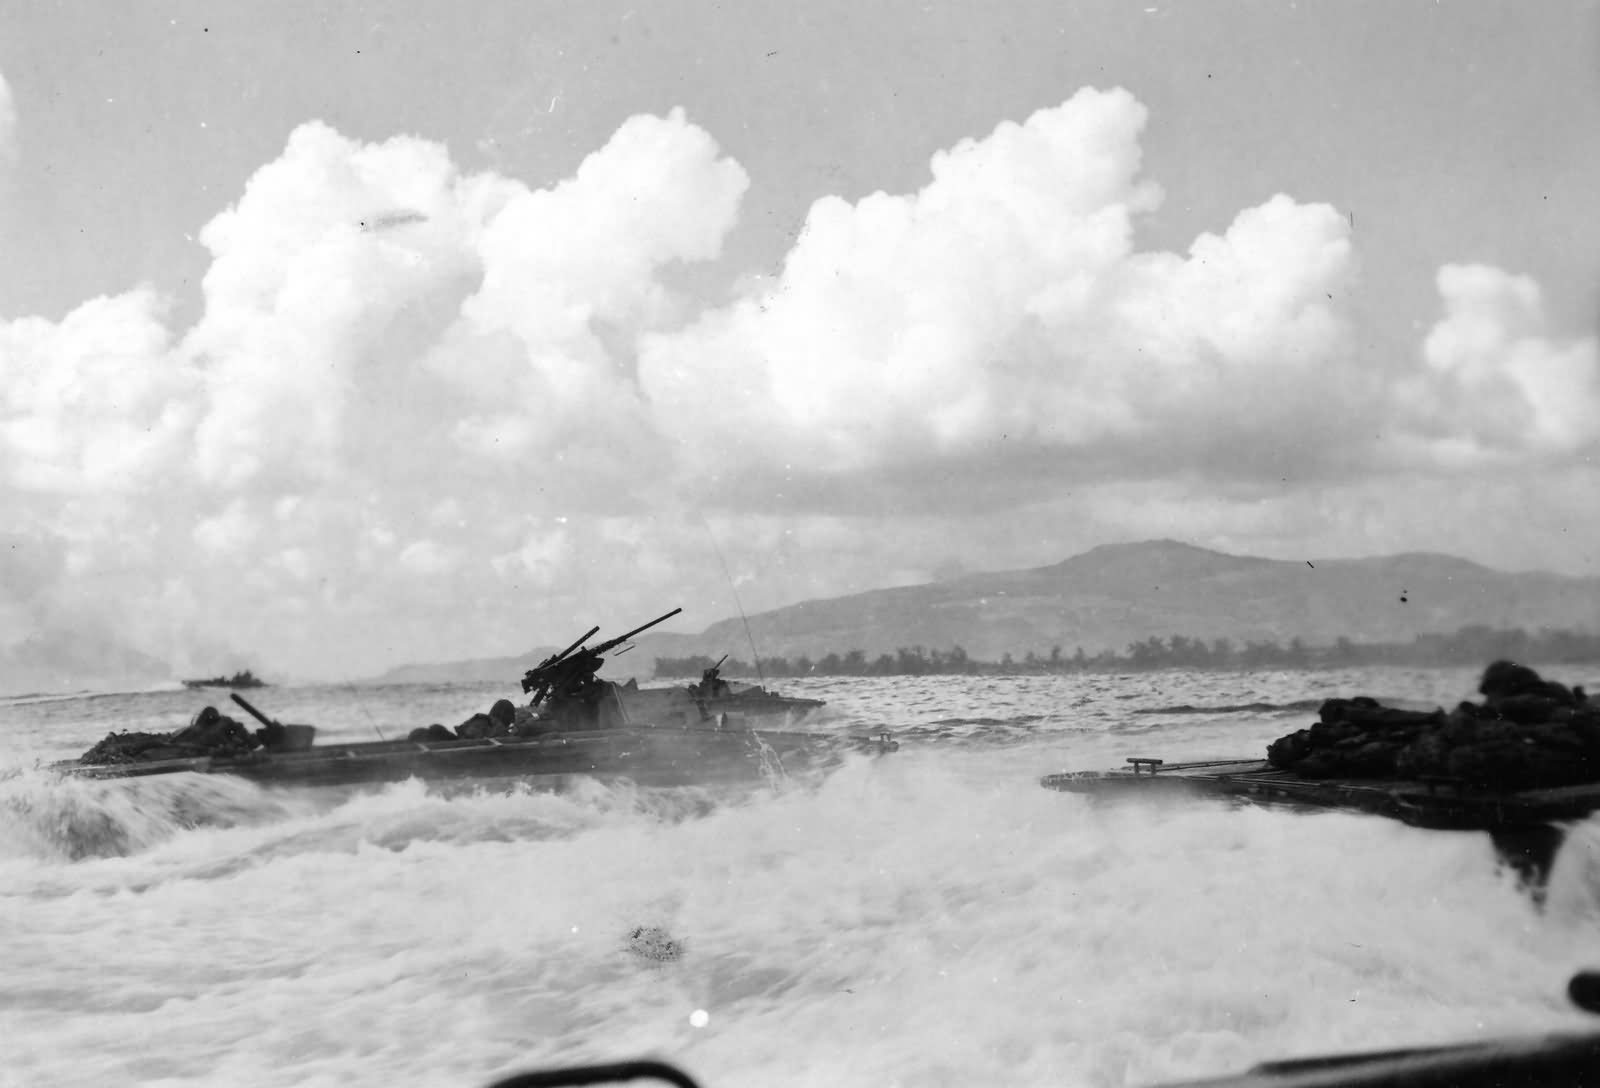 LVT’s heading for shore The 2nd and 4th Marine Division Saipan 15 June 1944